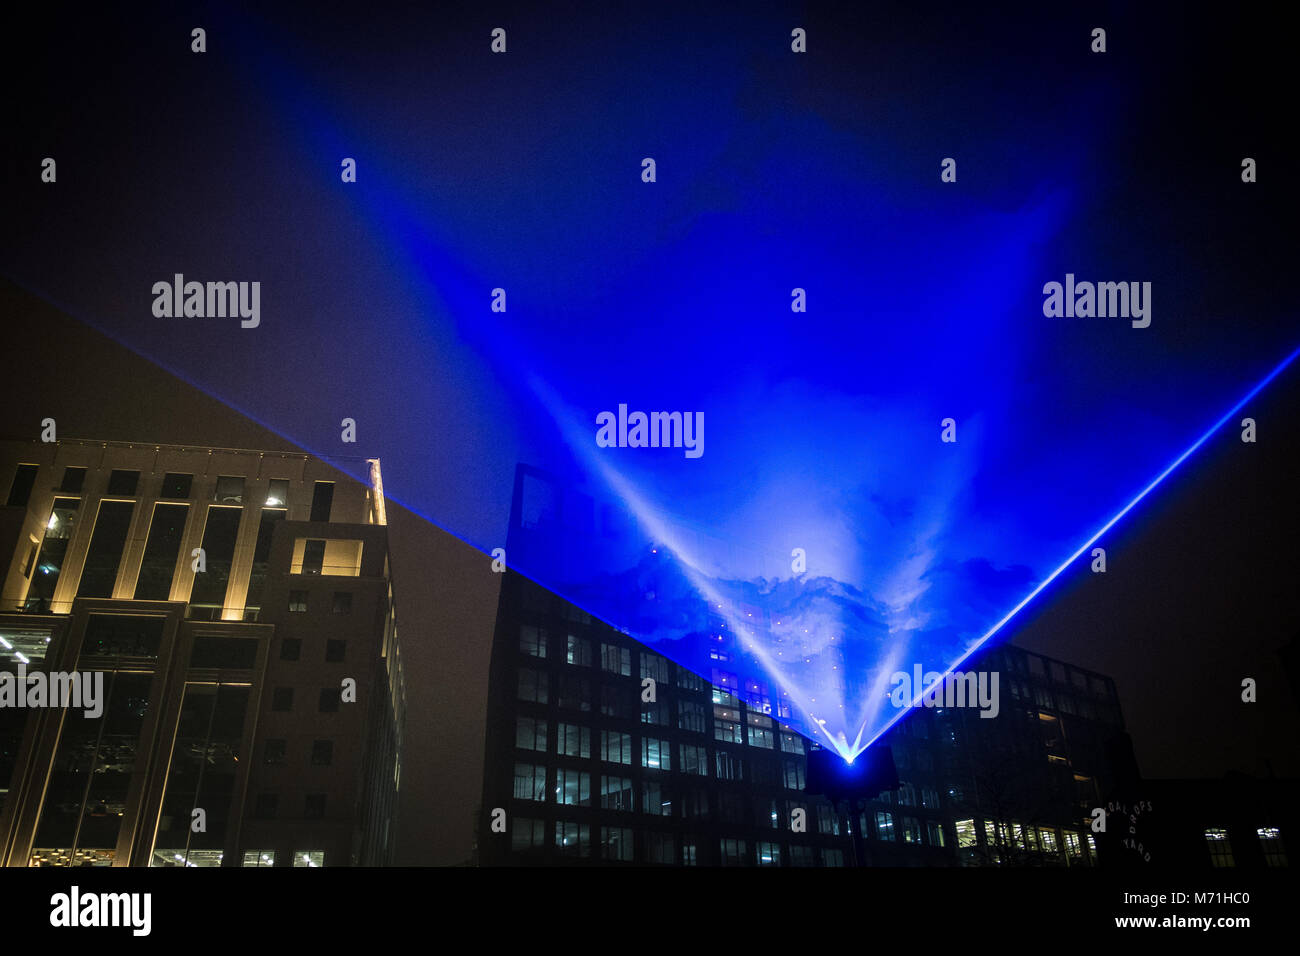 Light shows at London's annual Lumiere event that showcases art installations across the capital. Stock Photo